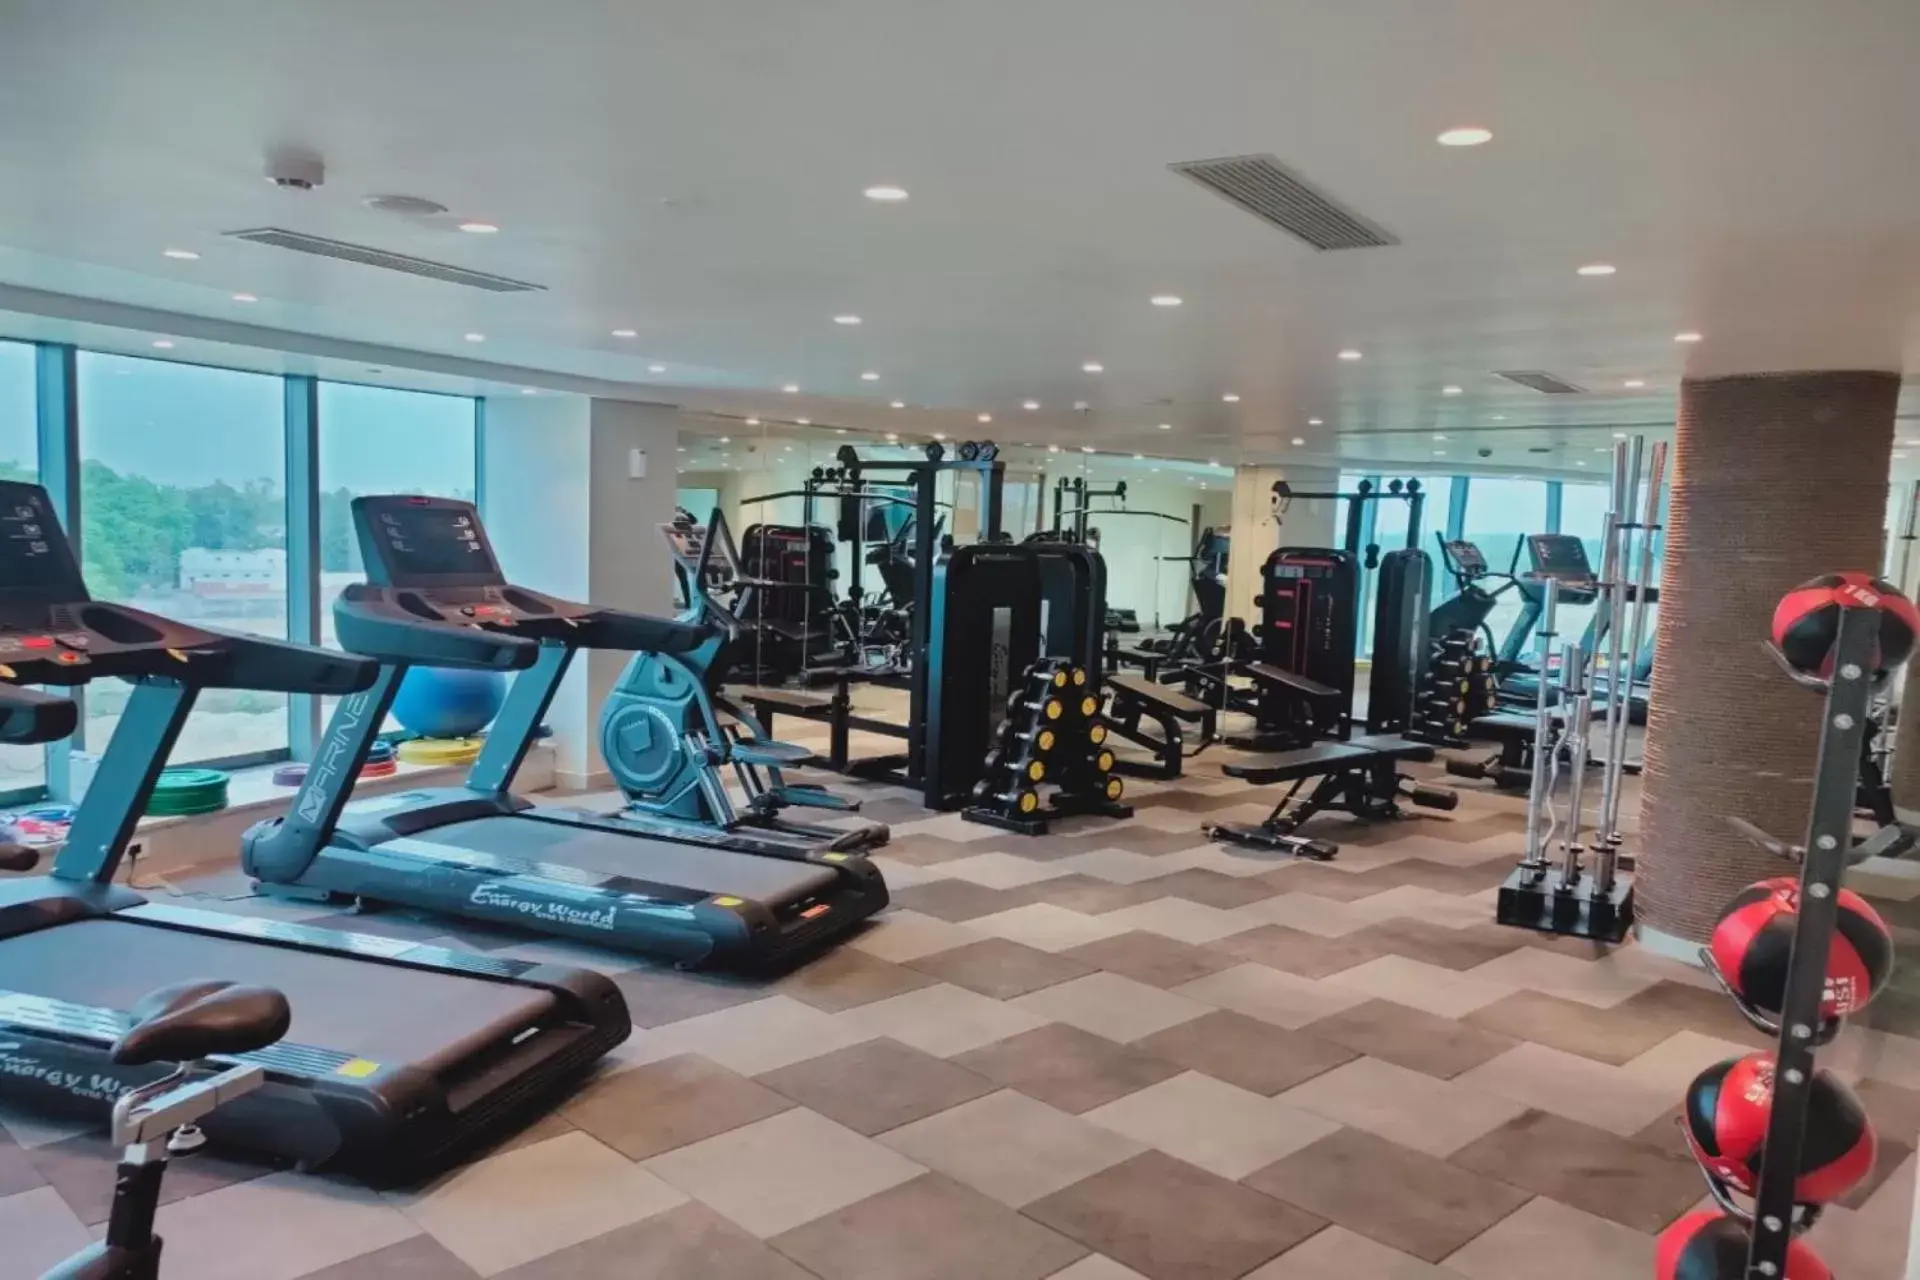 Fitness centre/facilities, Fitness Center/Facilities in Radisson Hotel Bareilly Airport